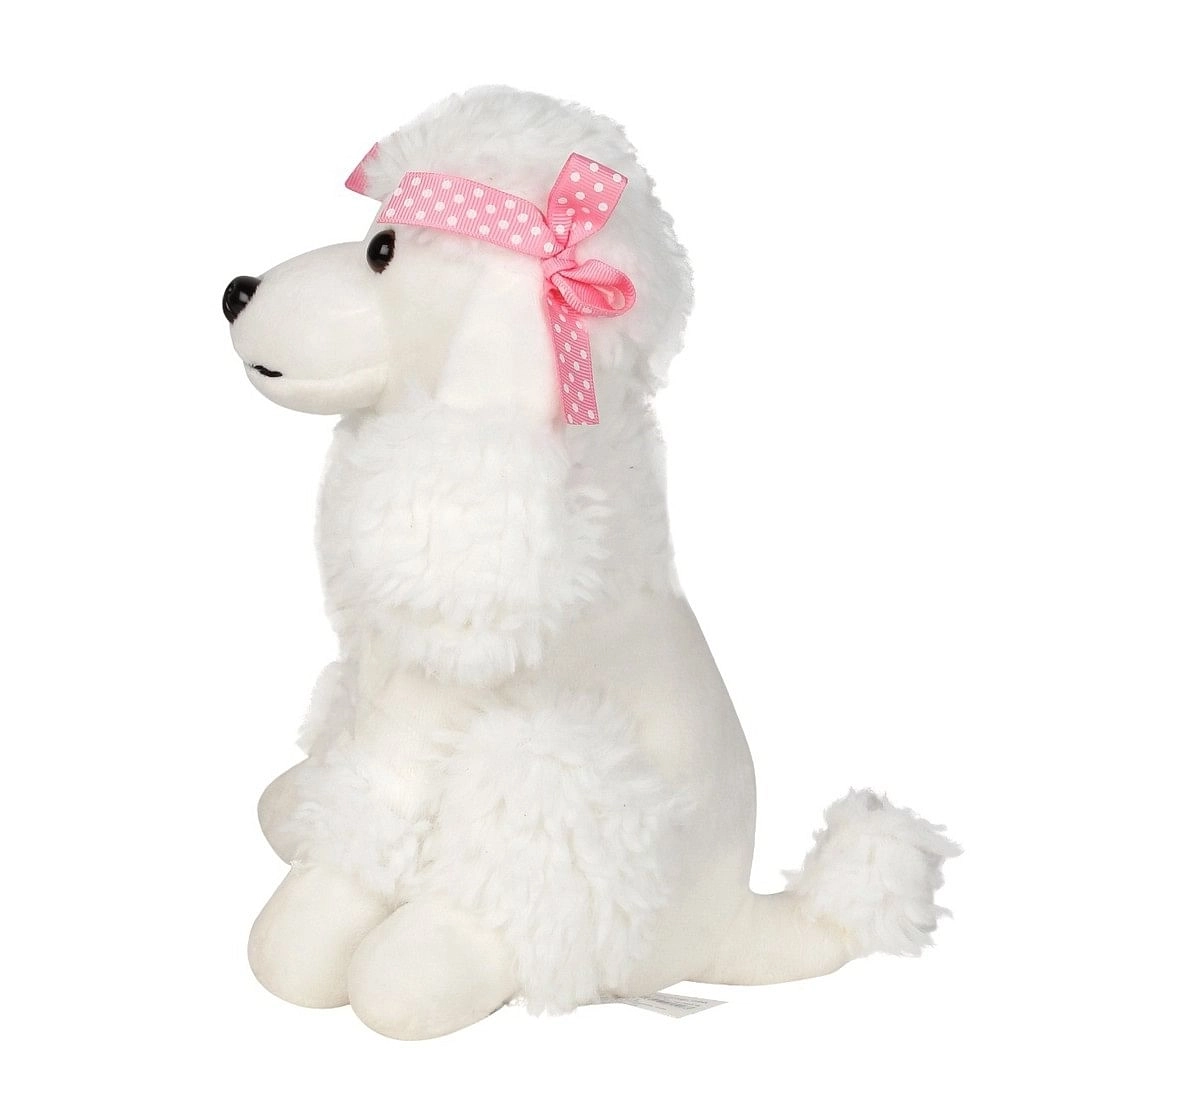 Cuddles Poodle Dog 6 Cms Plush Toy for New Born Kids age 0M+ (White)